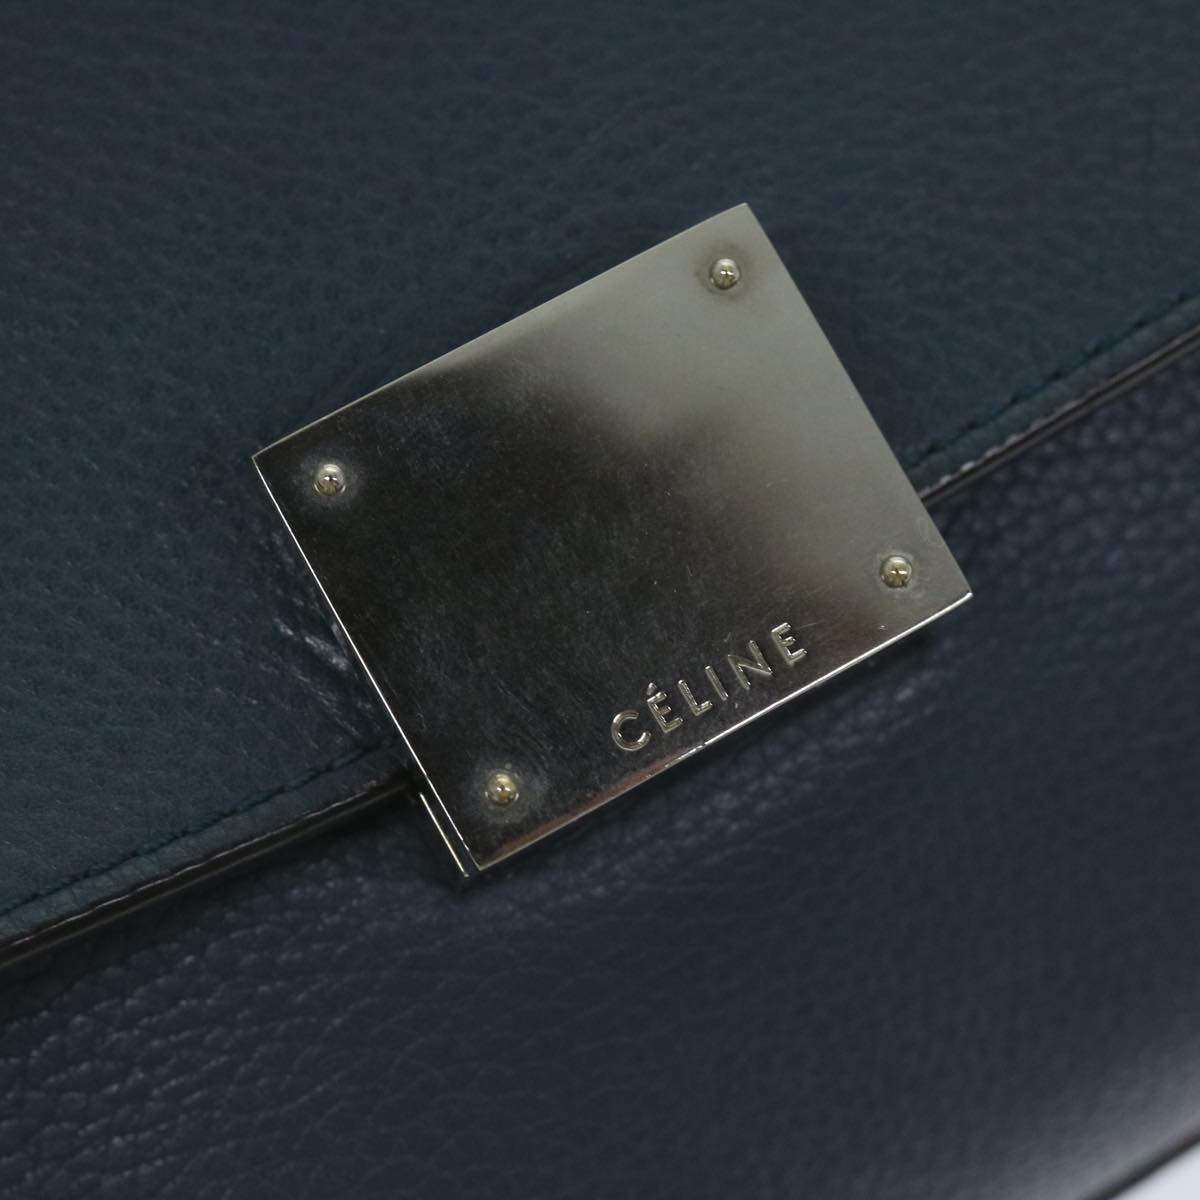 CELINE Hand Bag Suede Leather Navy Auth hk1003